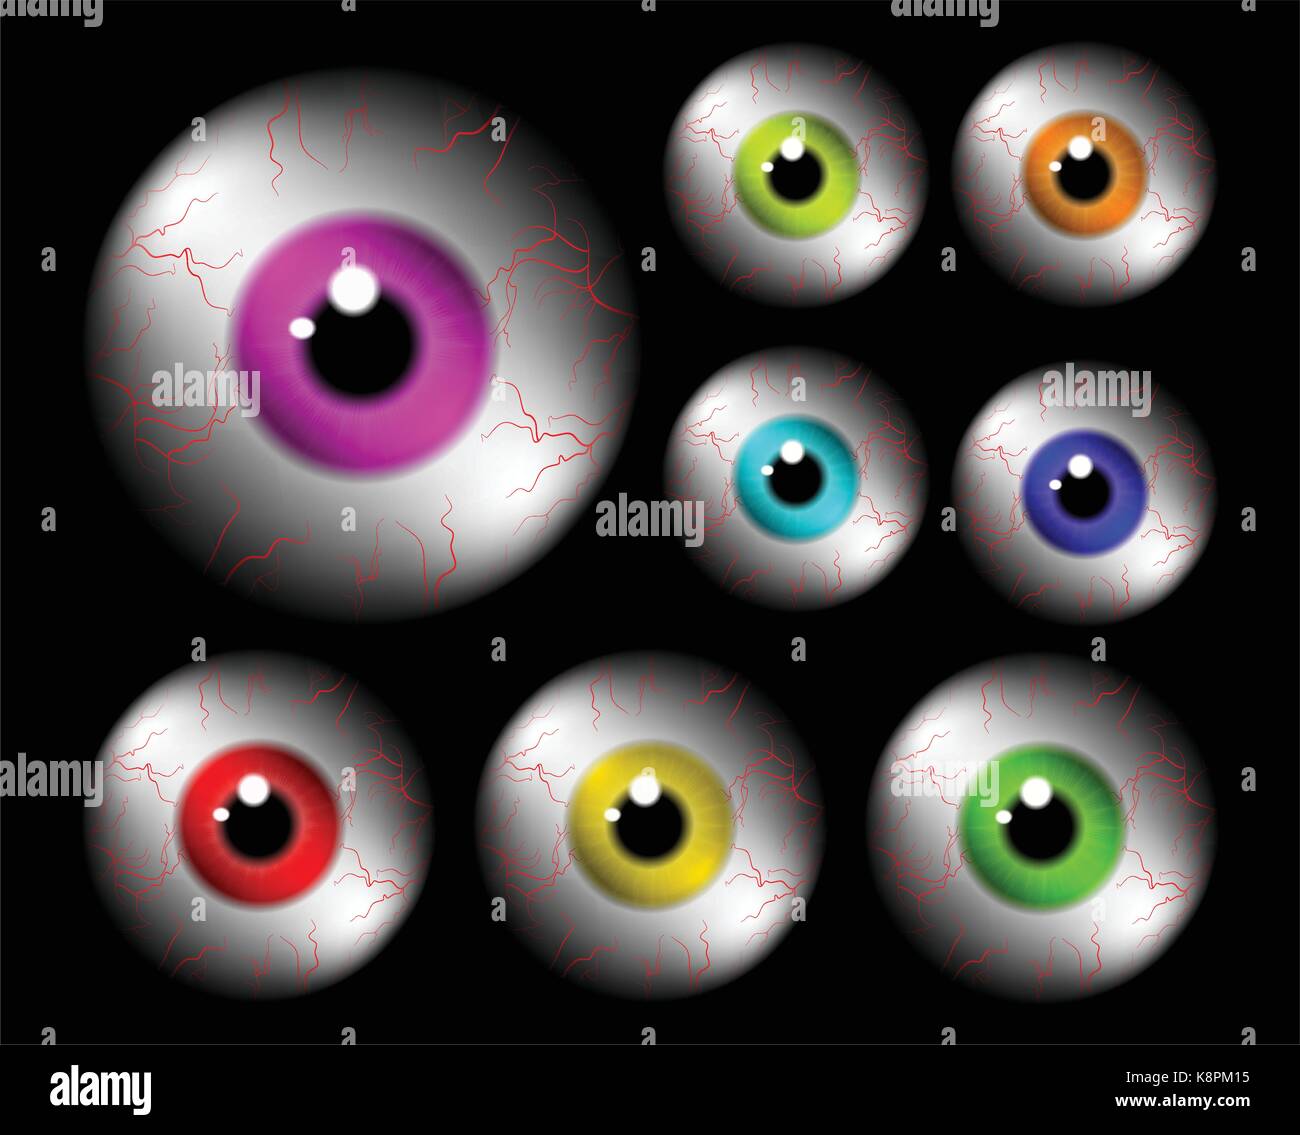 Set of realistic human eye ball with colorful pupil, iris. Vector illustration isolated on black background. Stock Vector